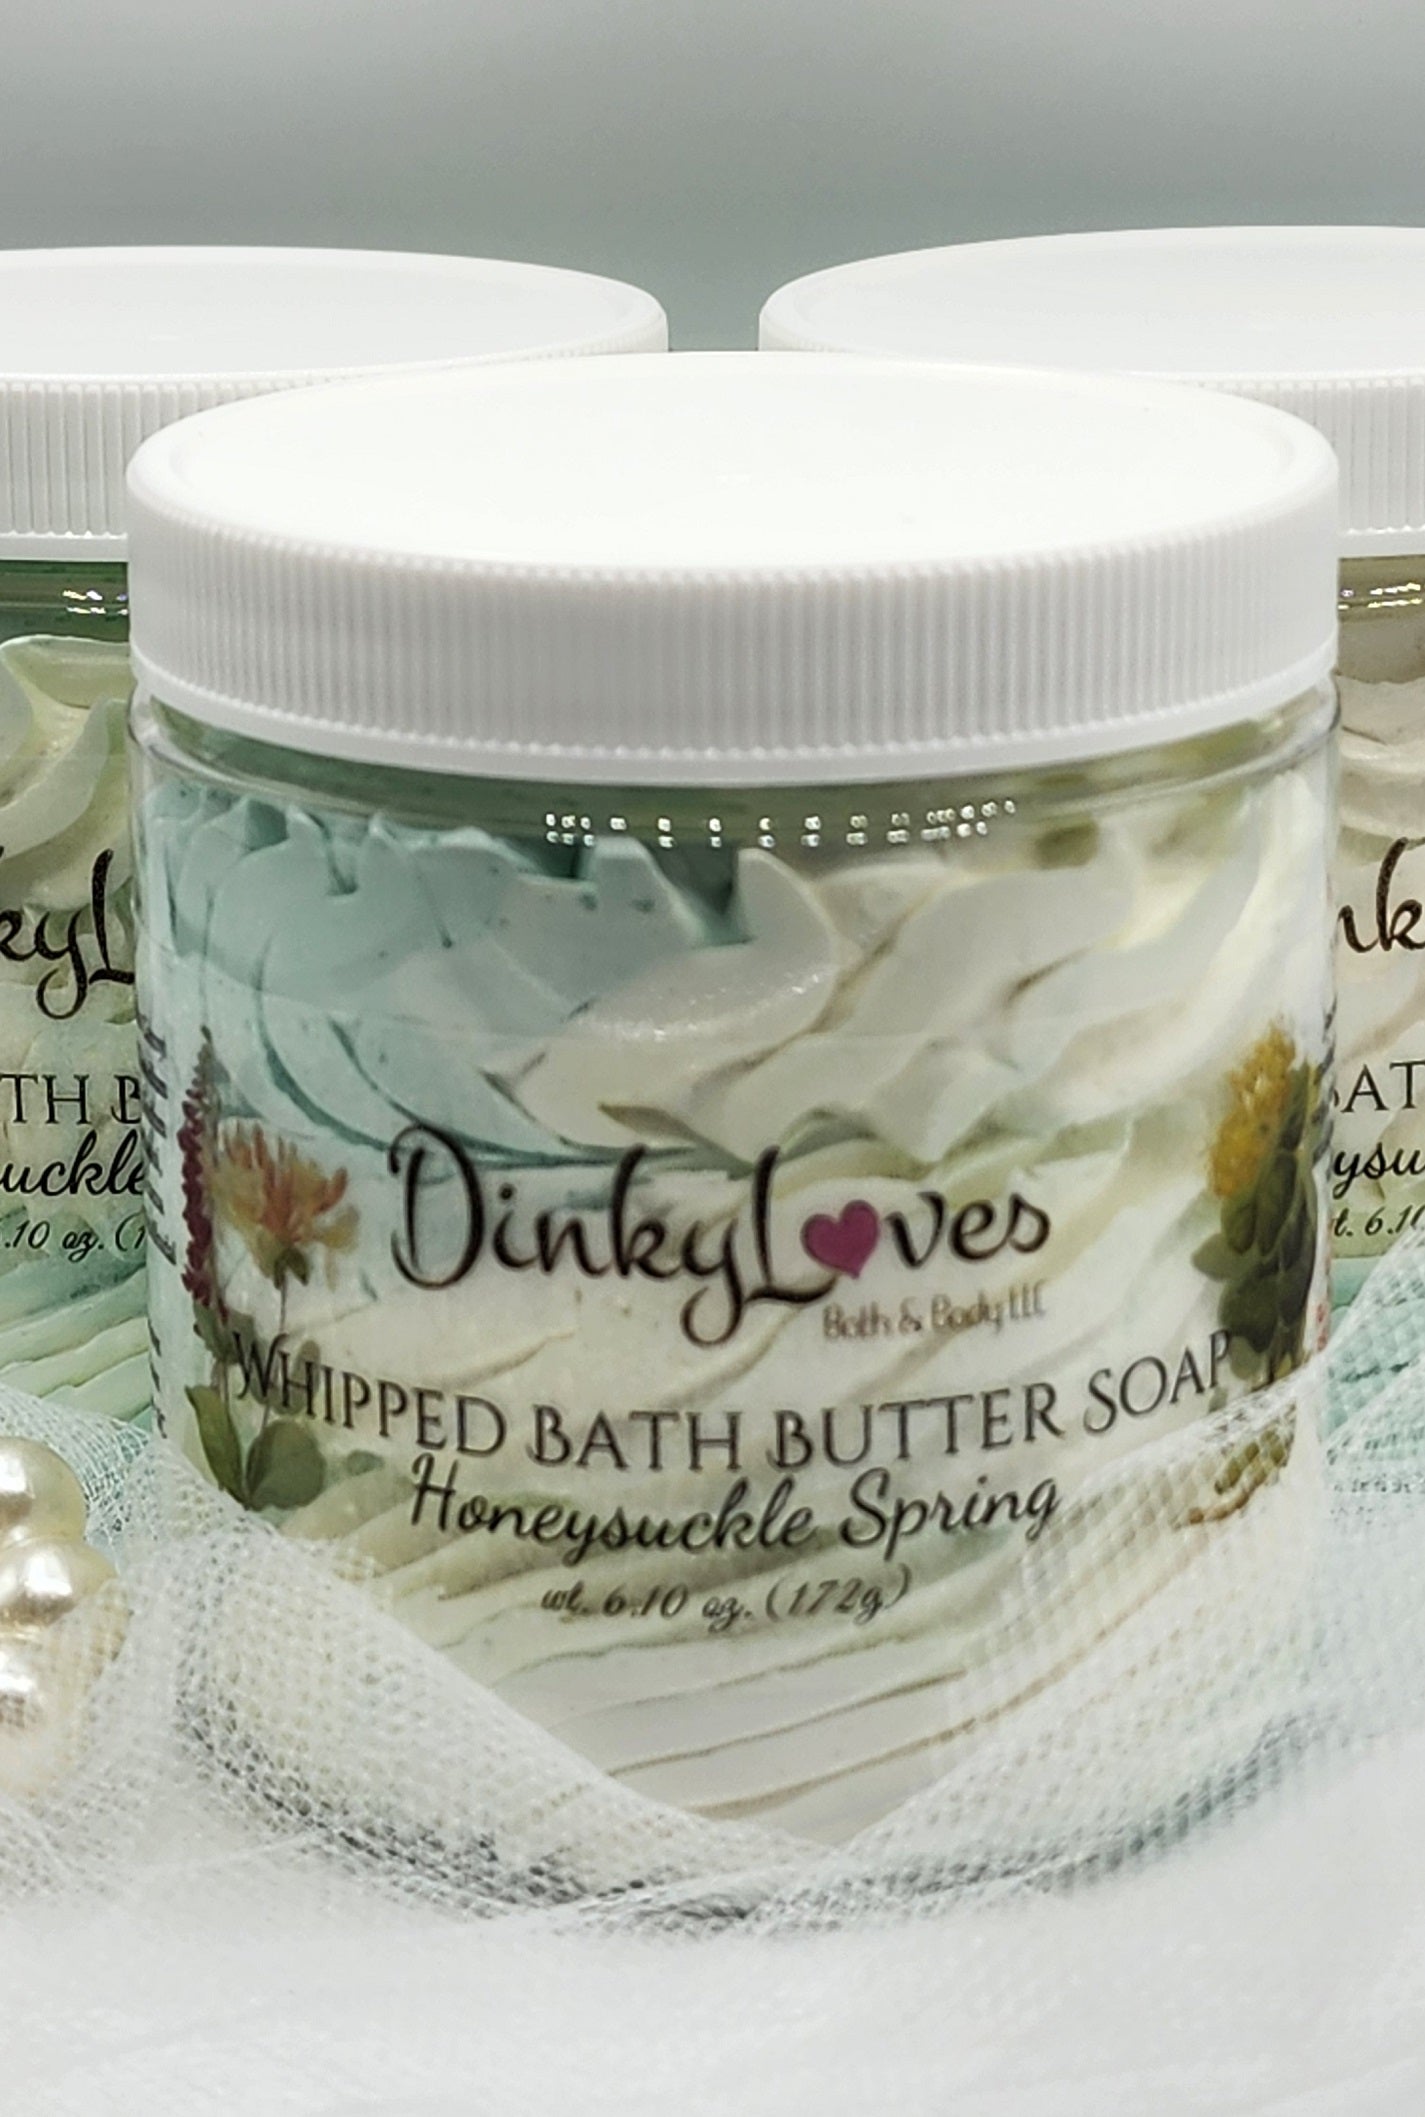 HONEYSUCKLE SPRING Whipped Bath Butter Soap / Gift Idea / Luxury Product / Cocoa Butter